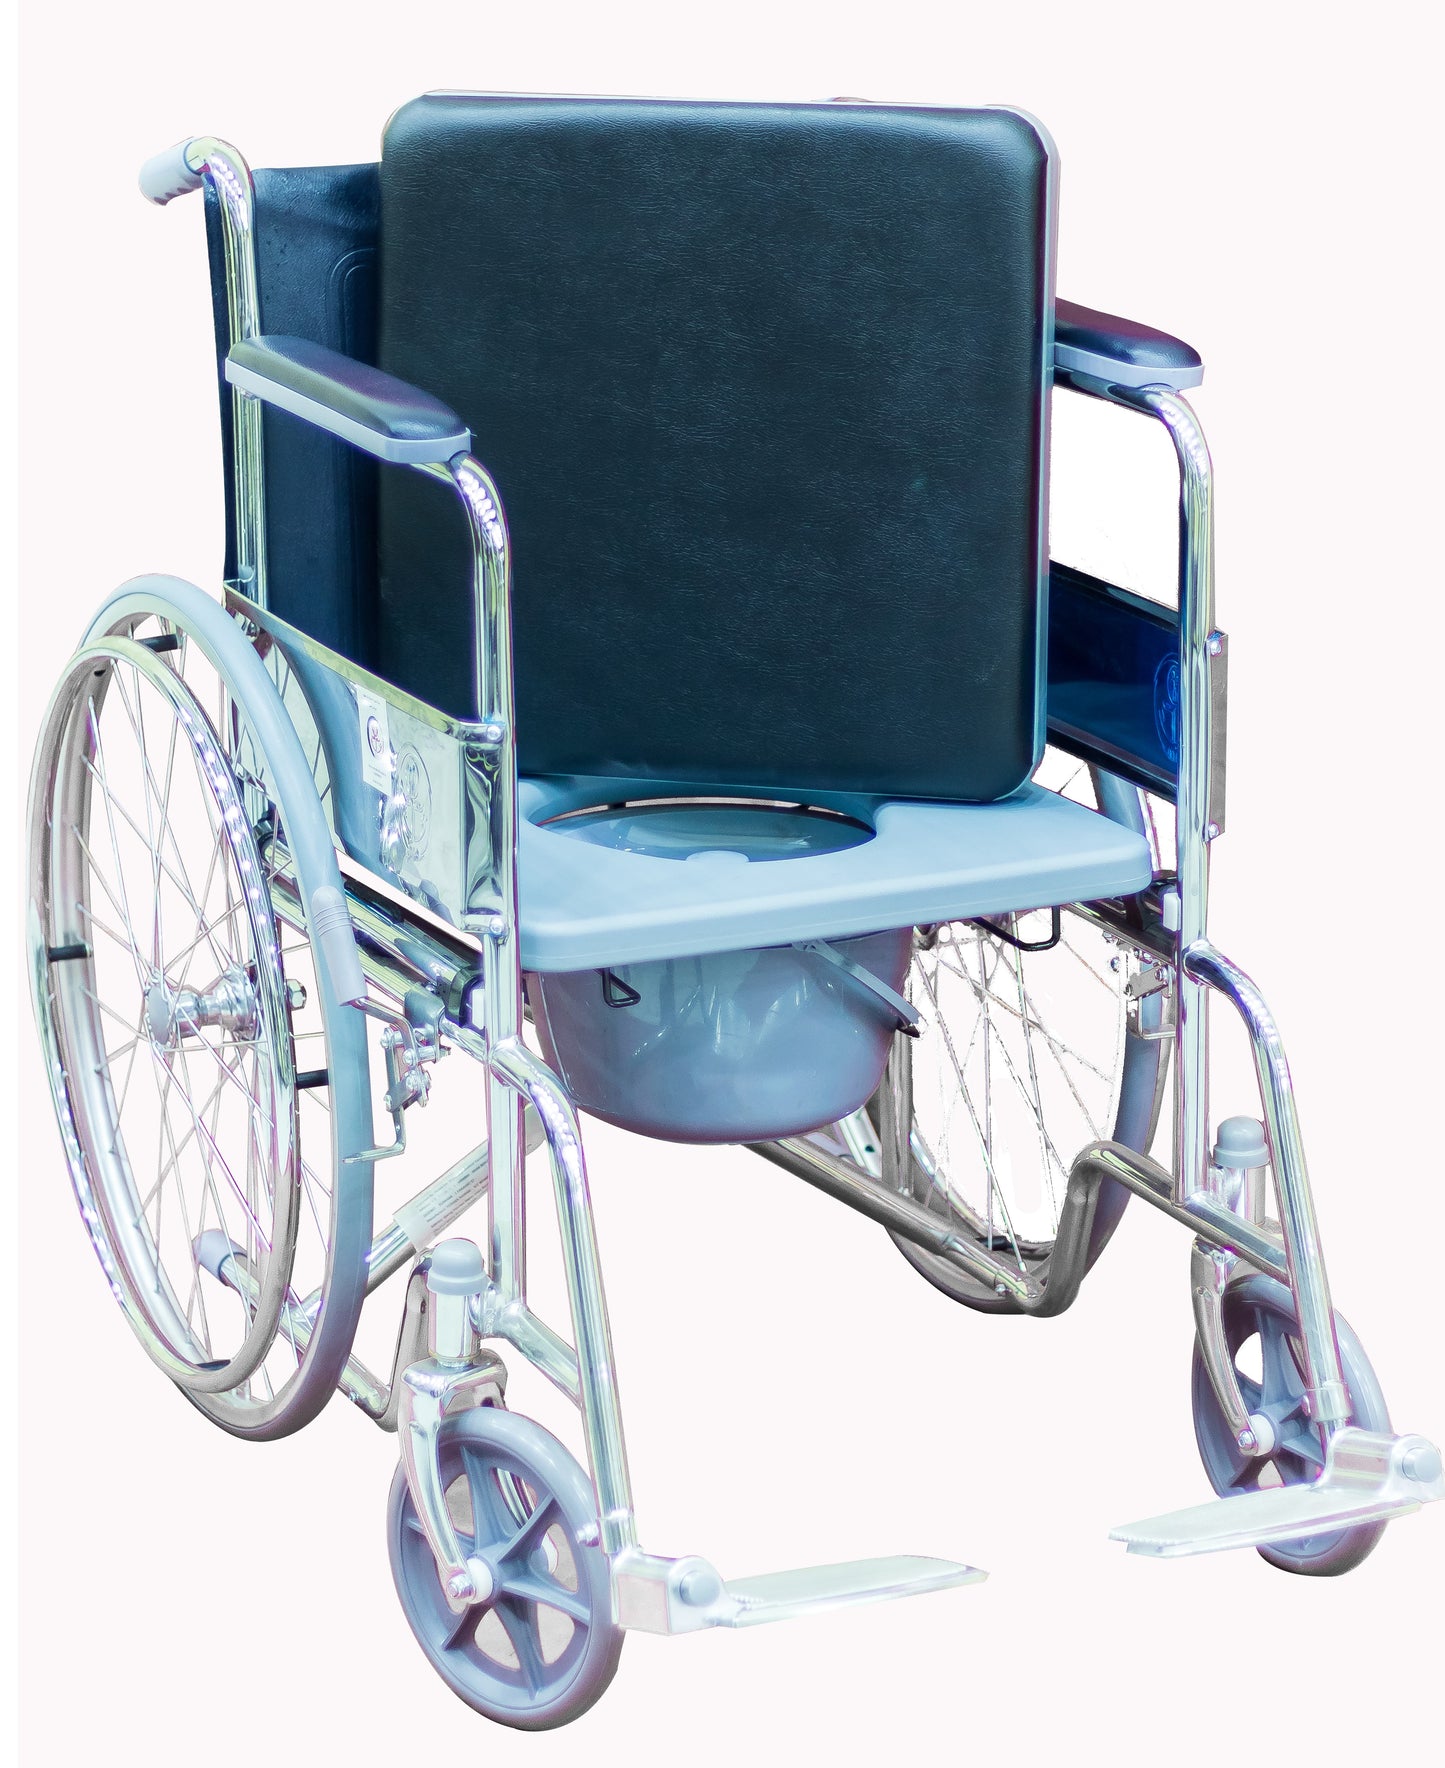 Commode Wheel Chair With large Wheels. By FOSHAN